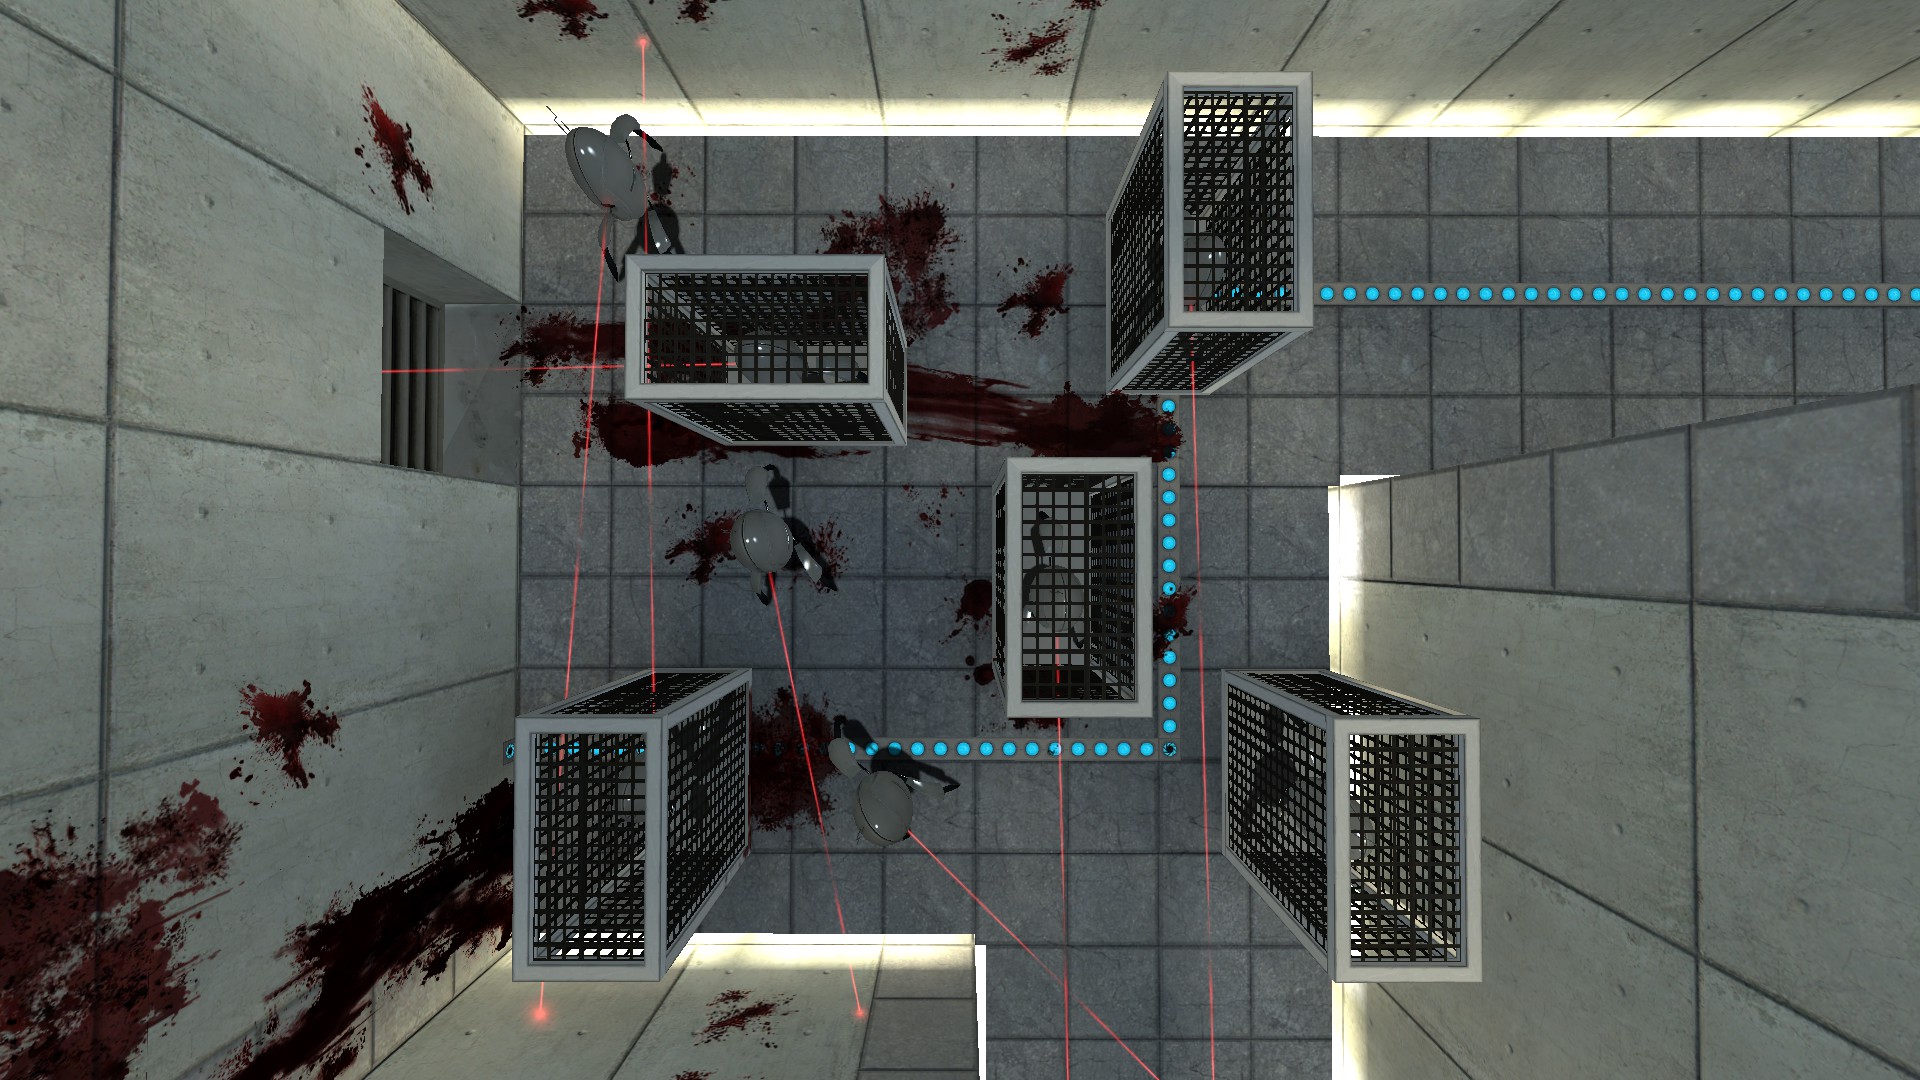 An intersection in the maze has several caged turrets.